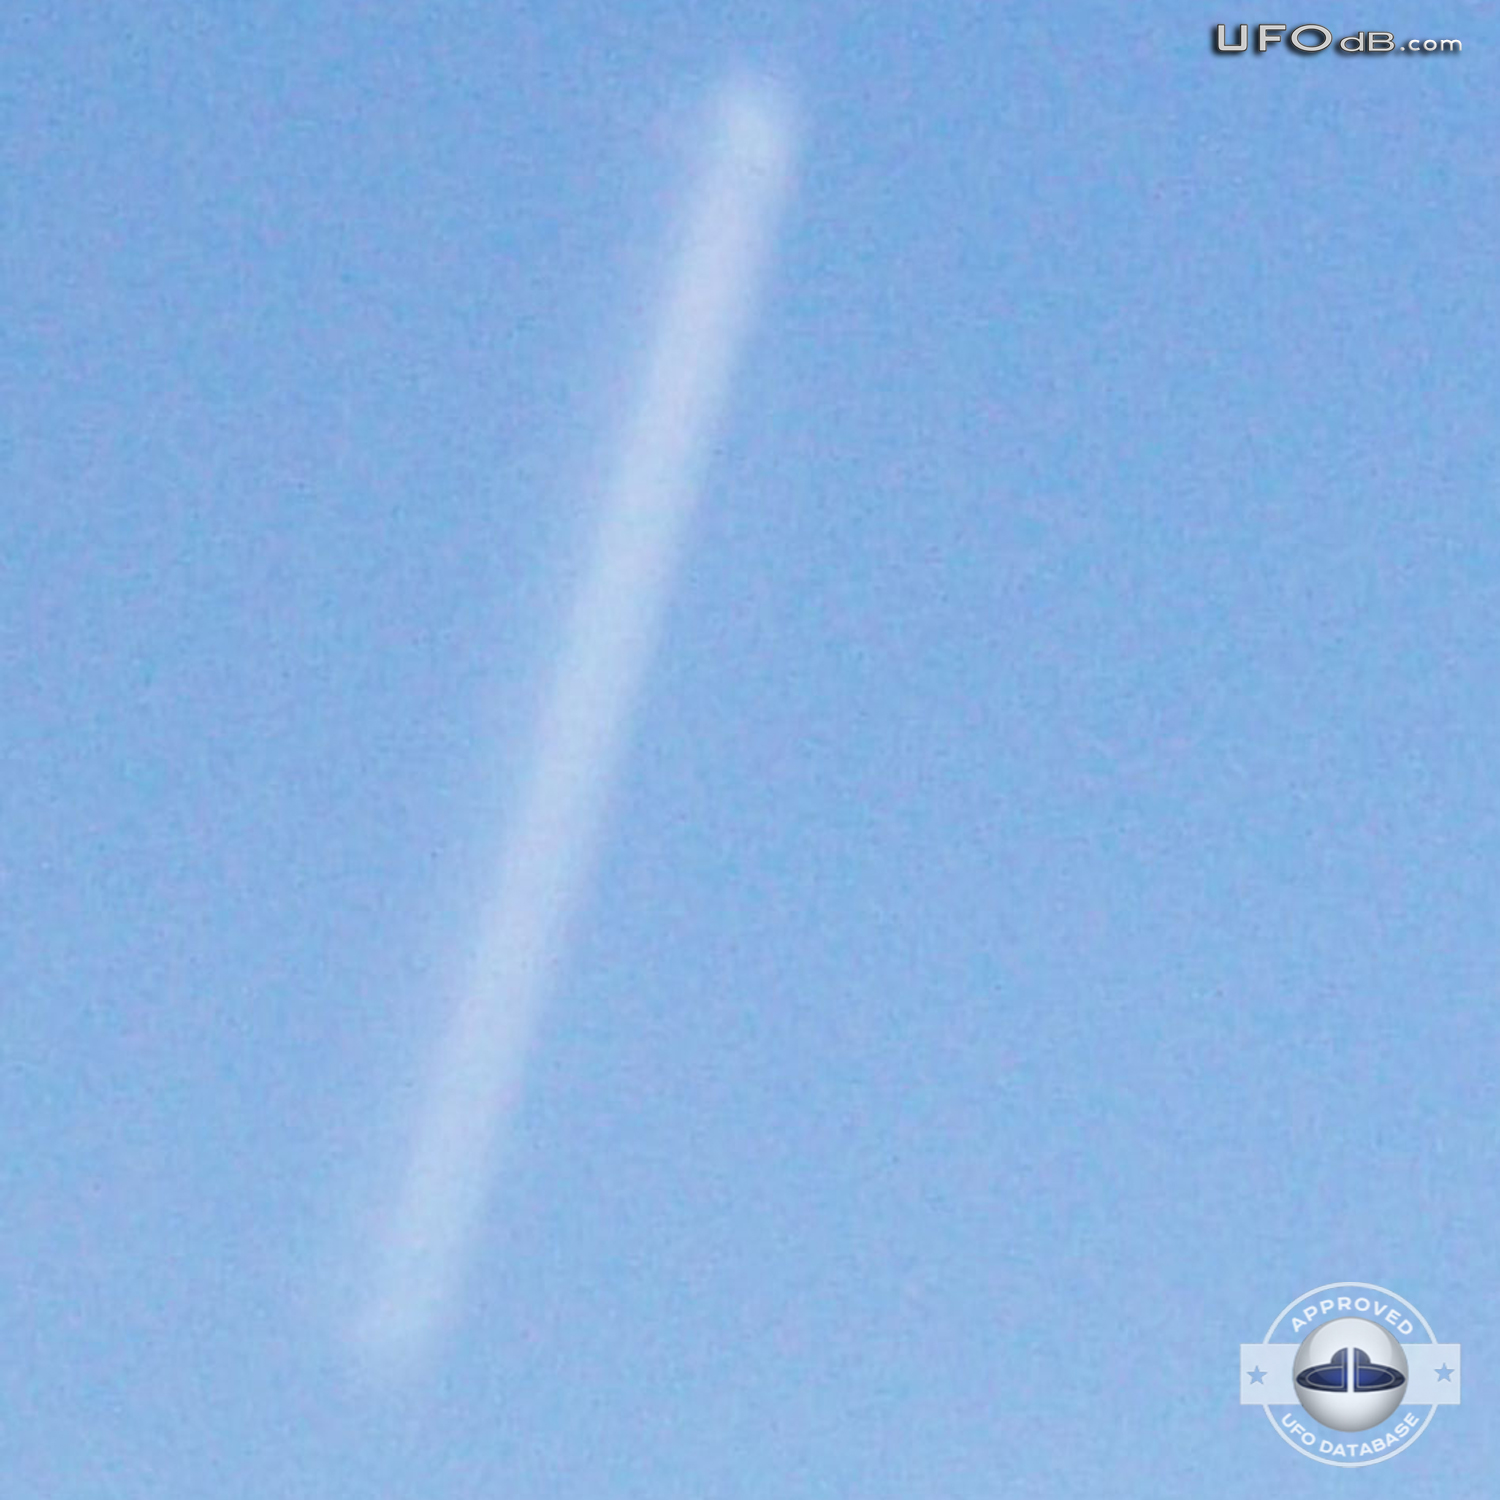 White line with UFO near Dog Island in Florida | USA | March 15 2011 UFO Picture #288-2